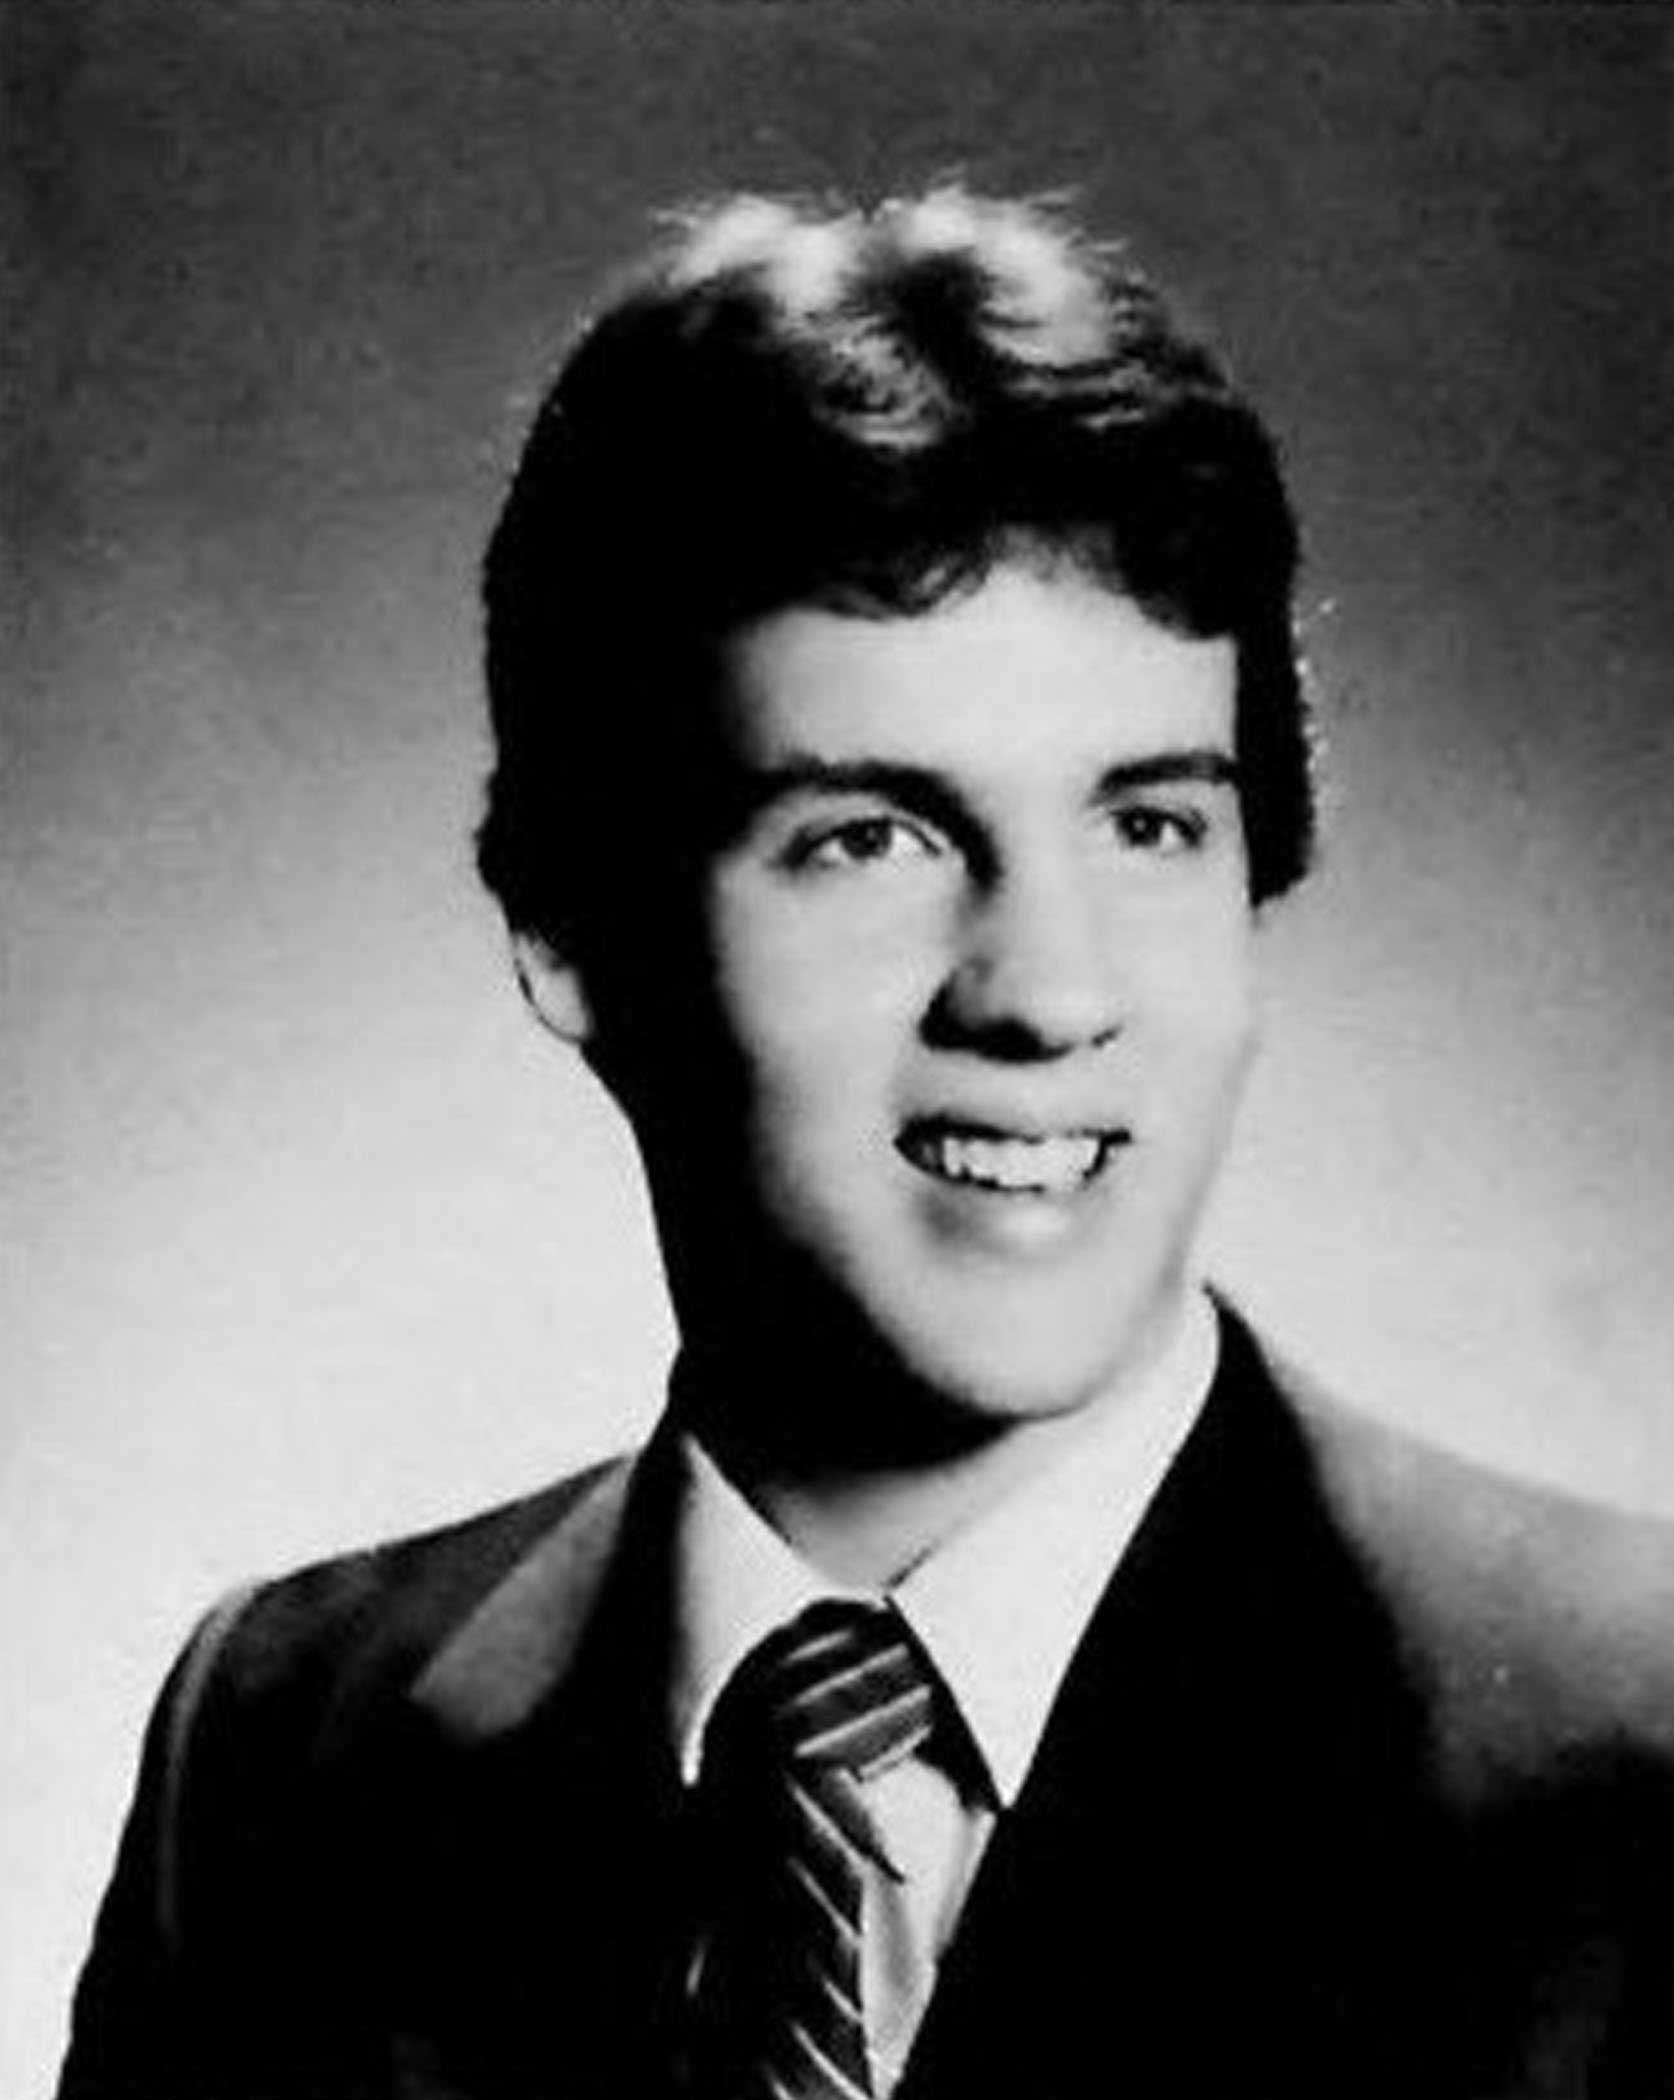 Chris Christie's senior class photo and profile from Livingston High School's yearbook in 1980.